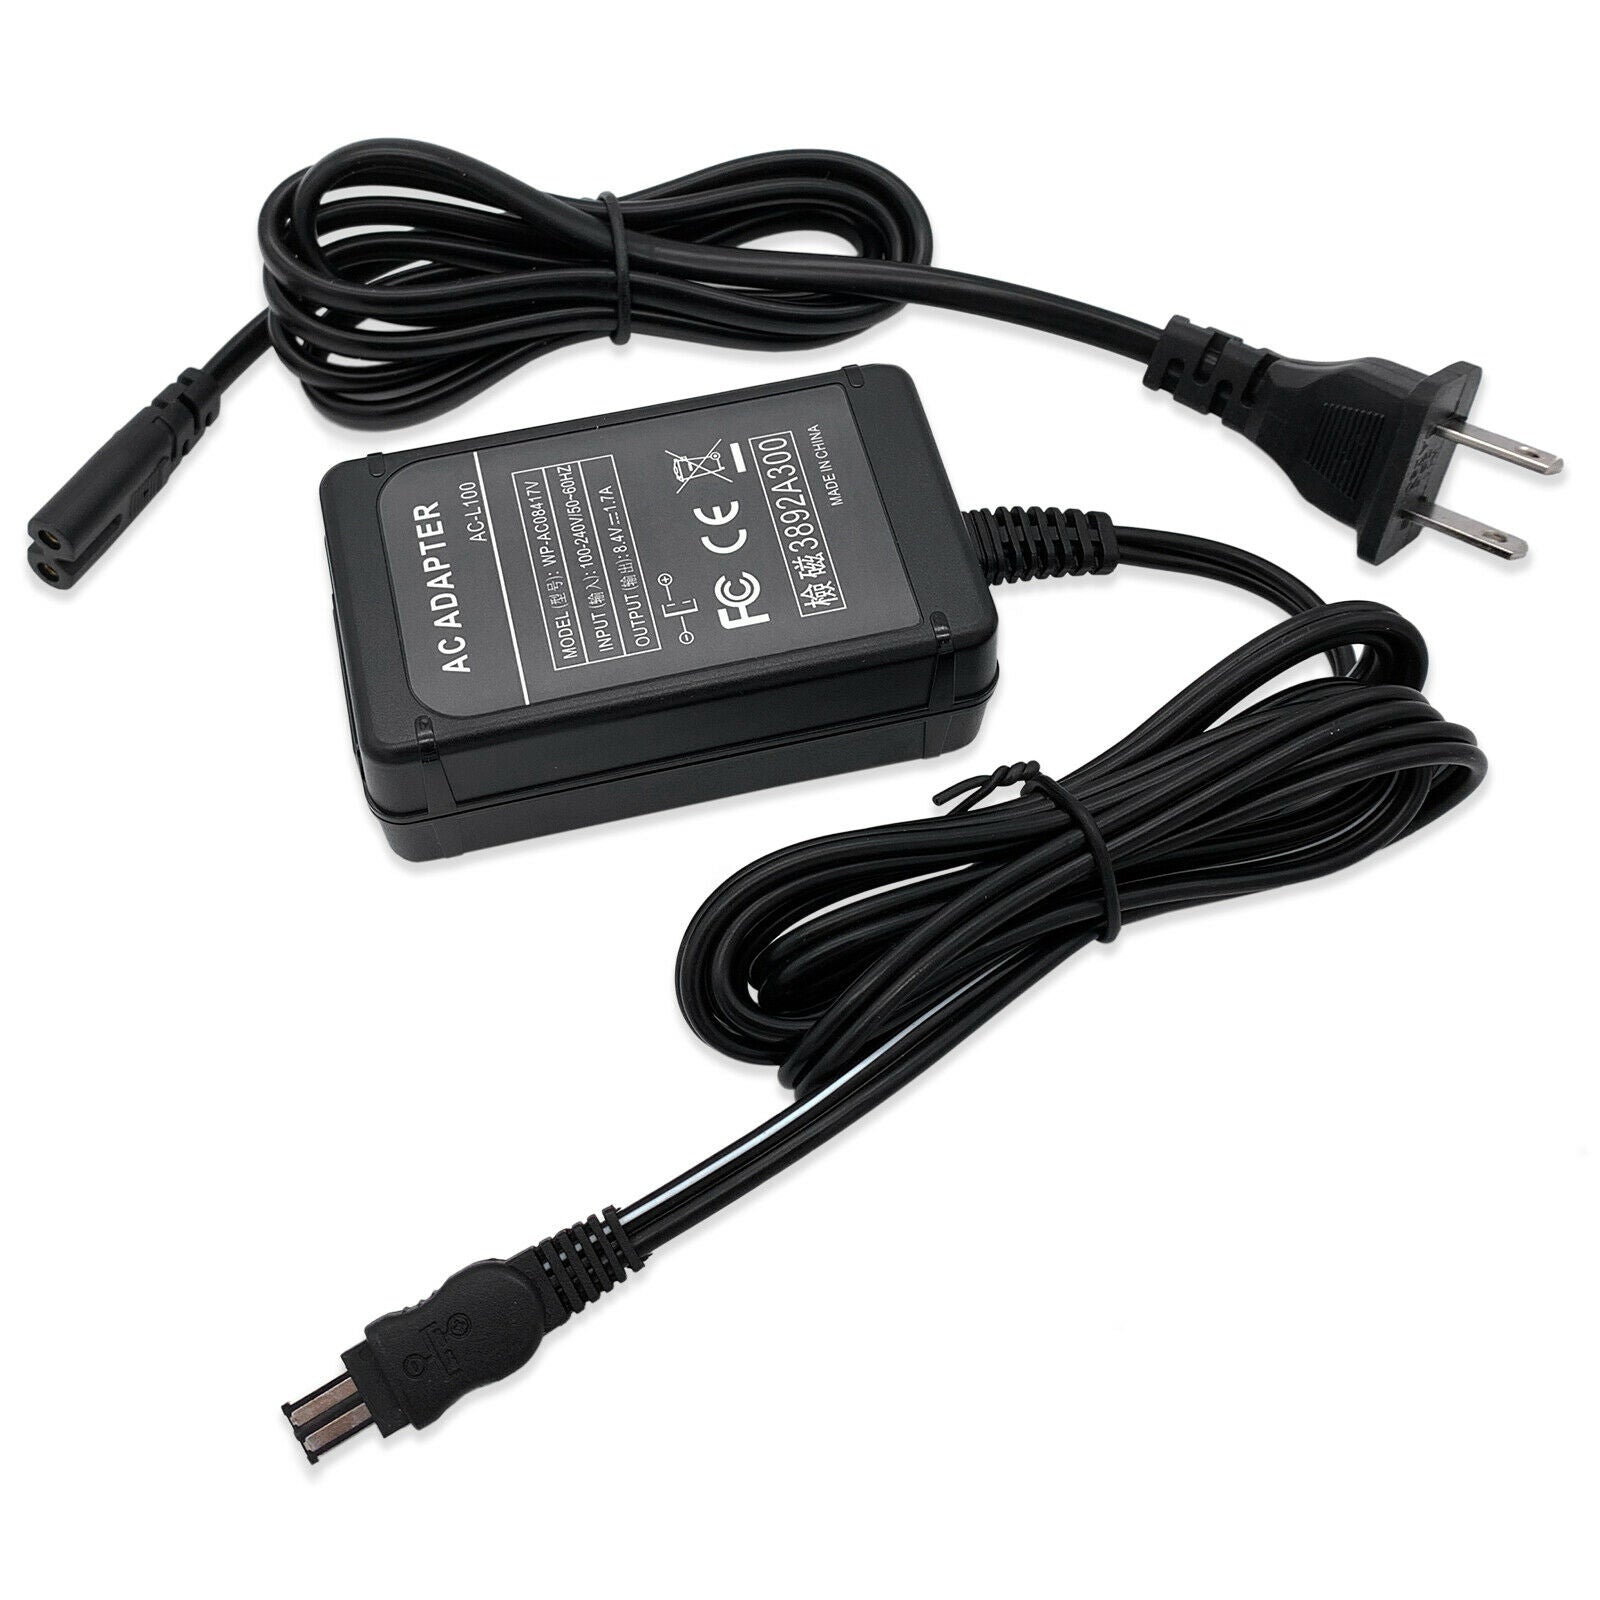 AC Power Adapter Charger Cord For Sony HandyCam DCR-TRV310 DCR